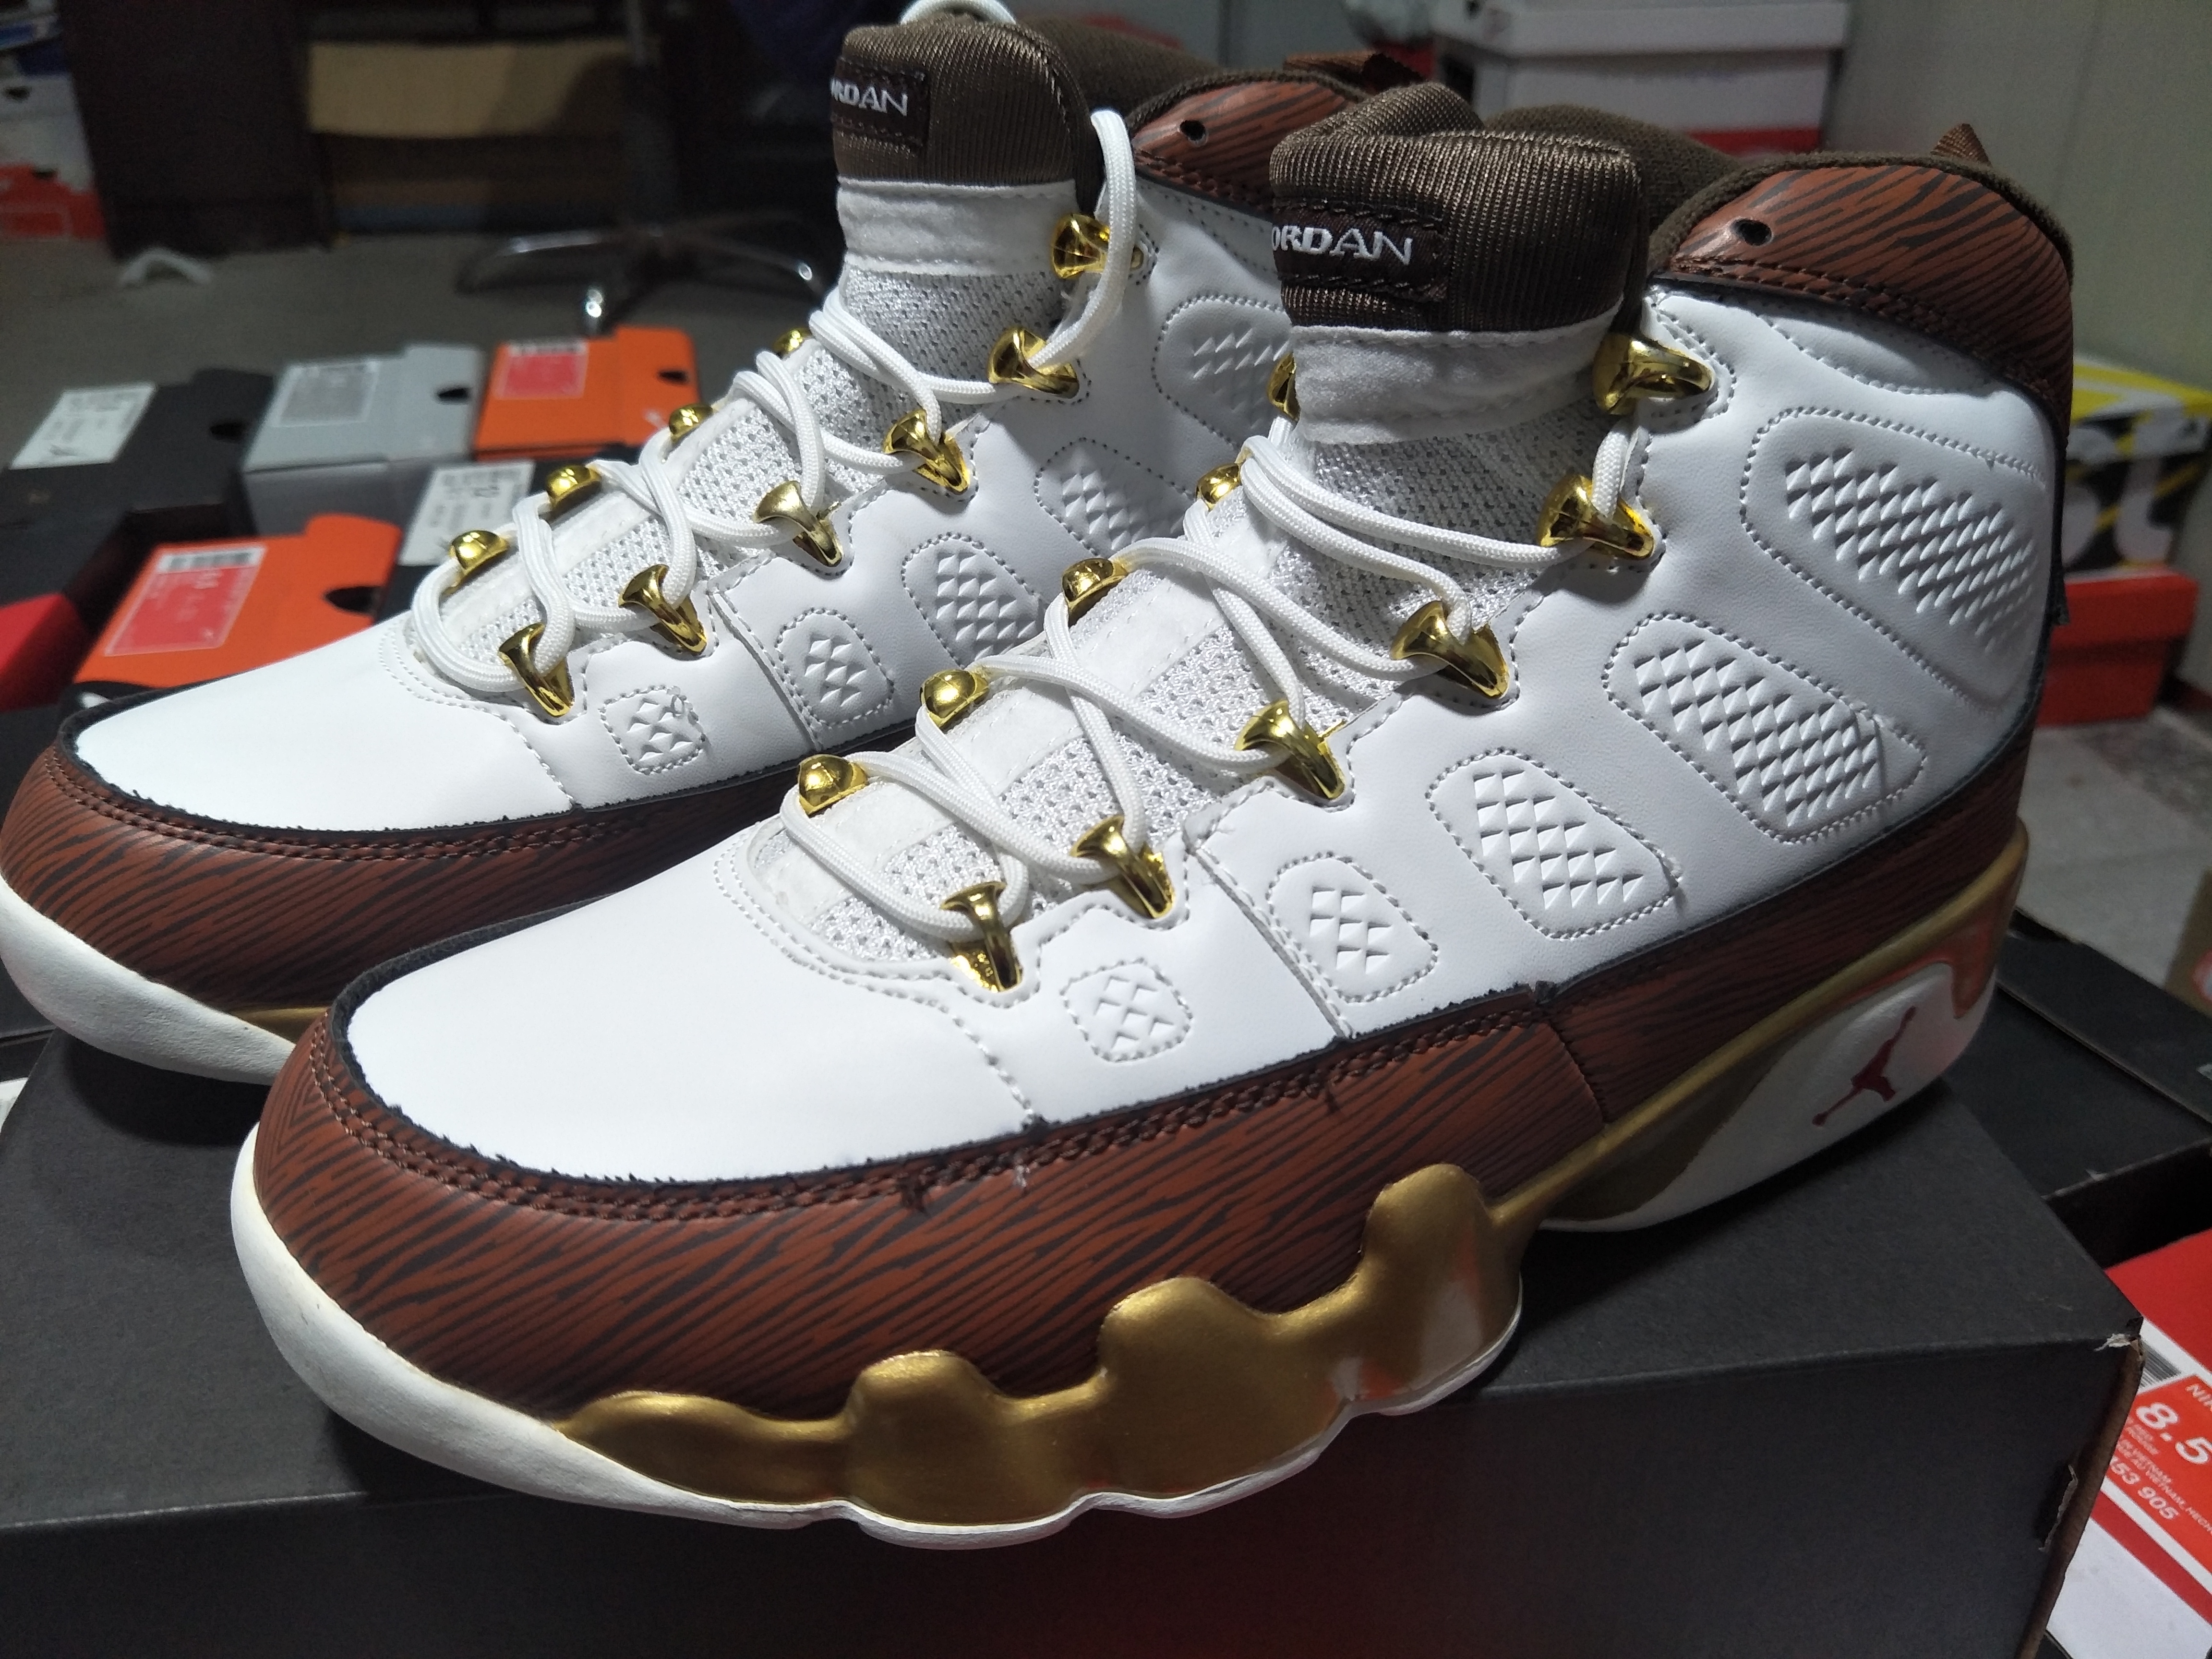 New Air Jordan 9 Retro White Brown Gold Shoes - Click Image to Close